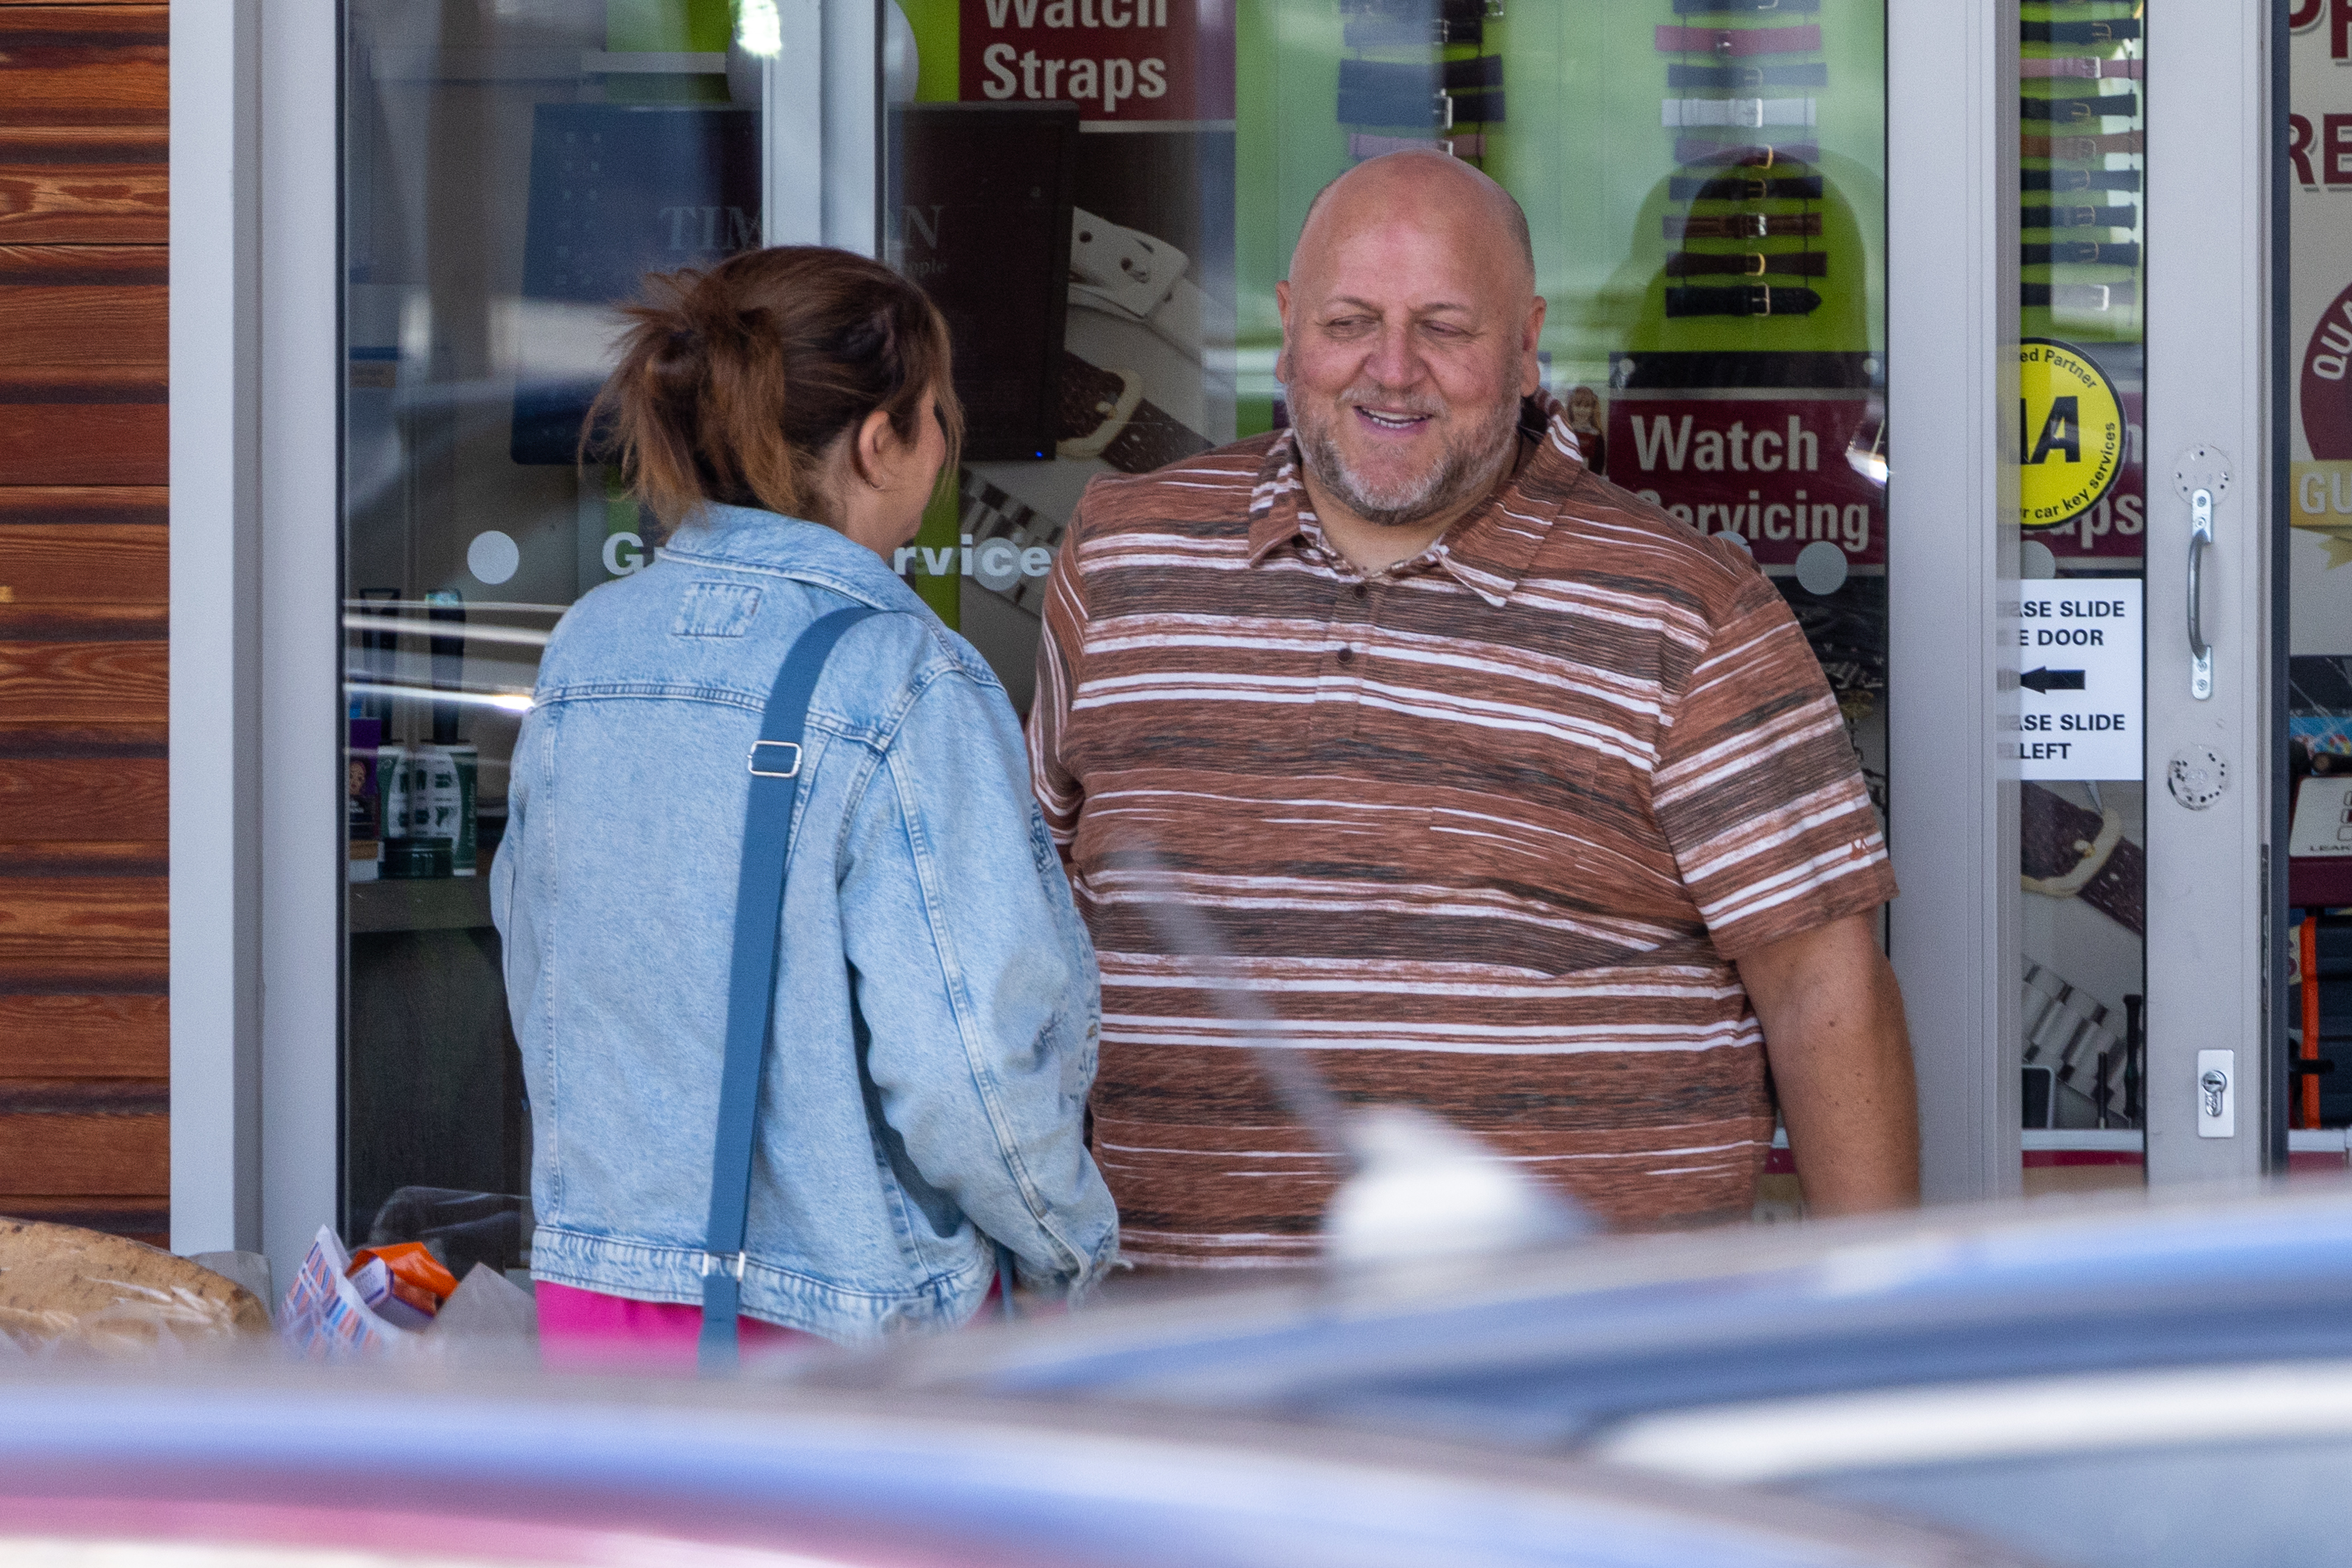 Adrian Bayford was all smiles during Sunday's trip to Tesco with new lover Tracey Biles